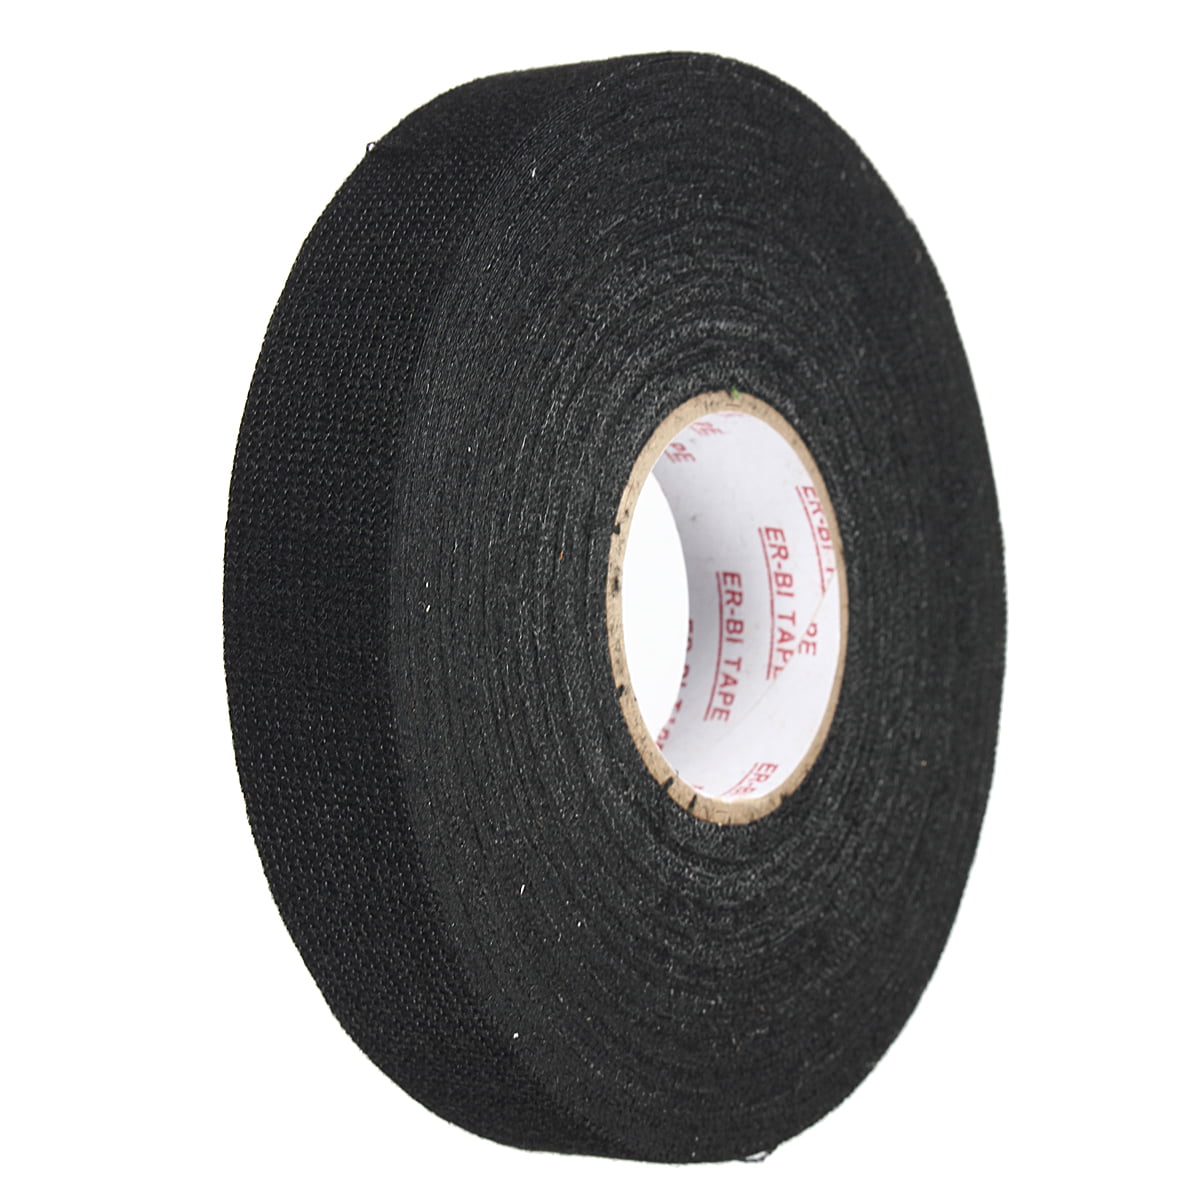 4 Rolls 19mm x 25m Adhesive Cloth Fabric Tape Cable Looms Wiring Harness 